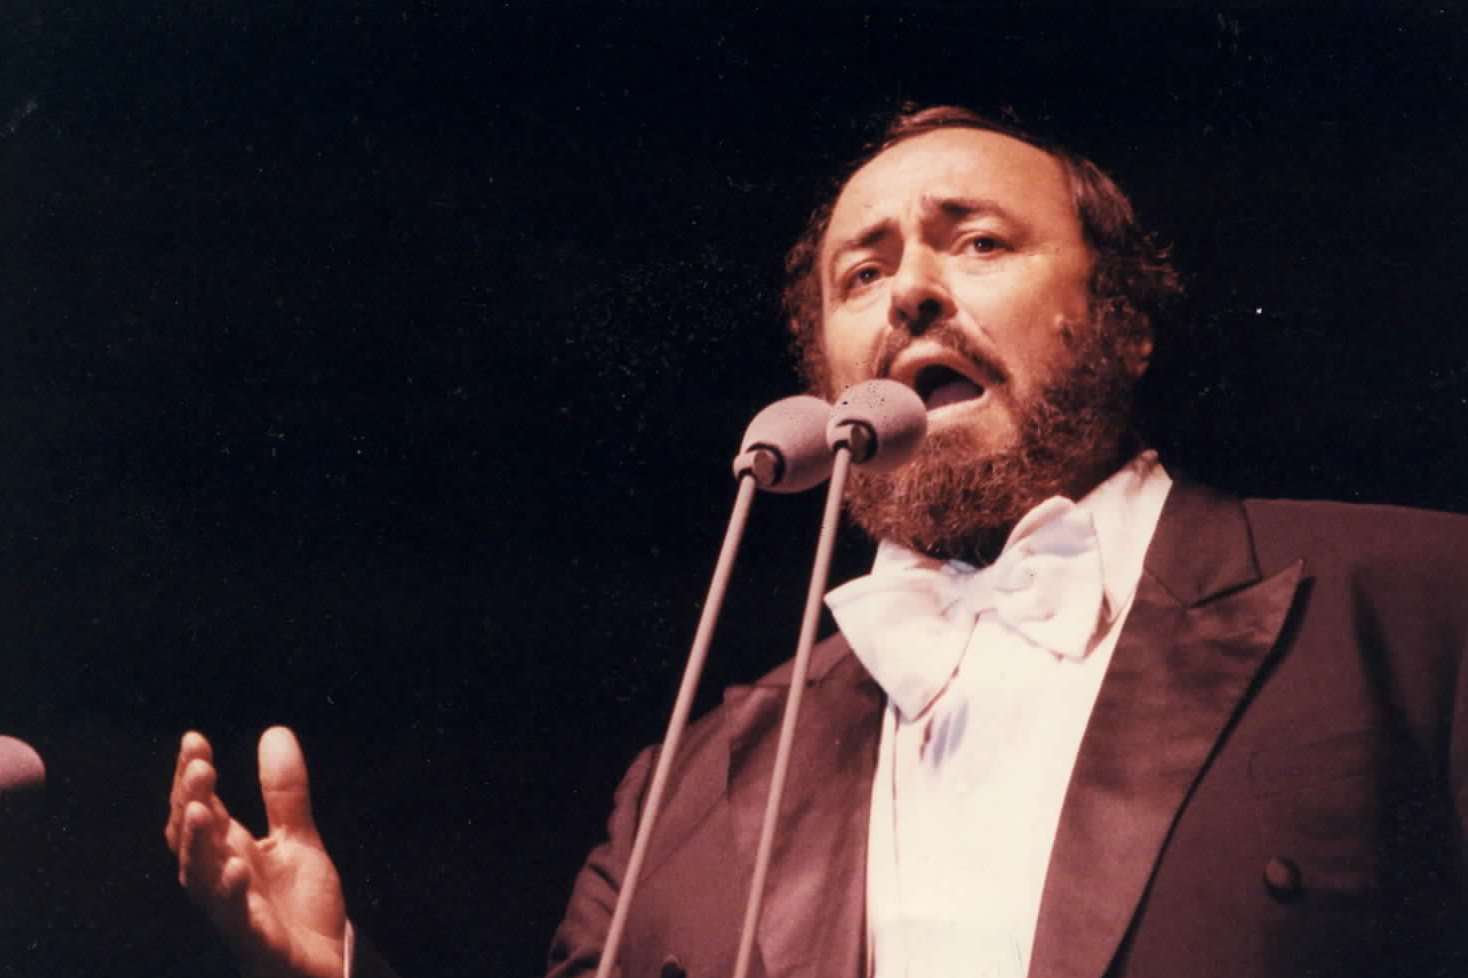 Luciano Pavarotti has been an inspiration for Russell